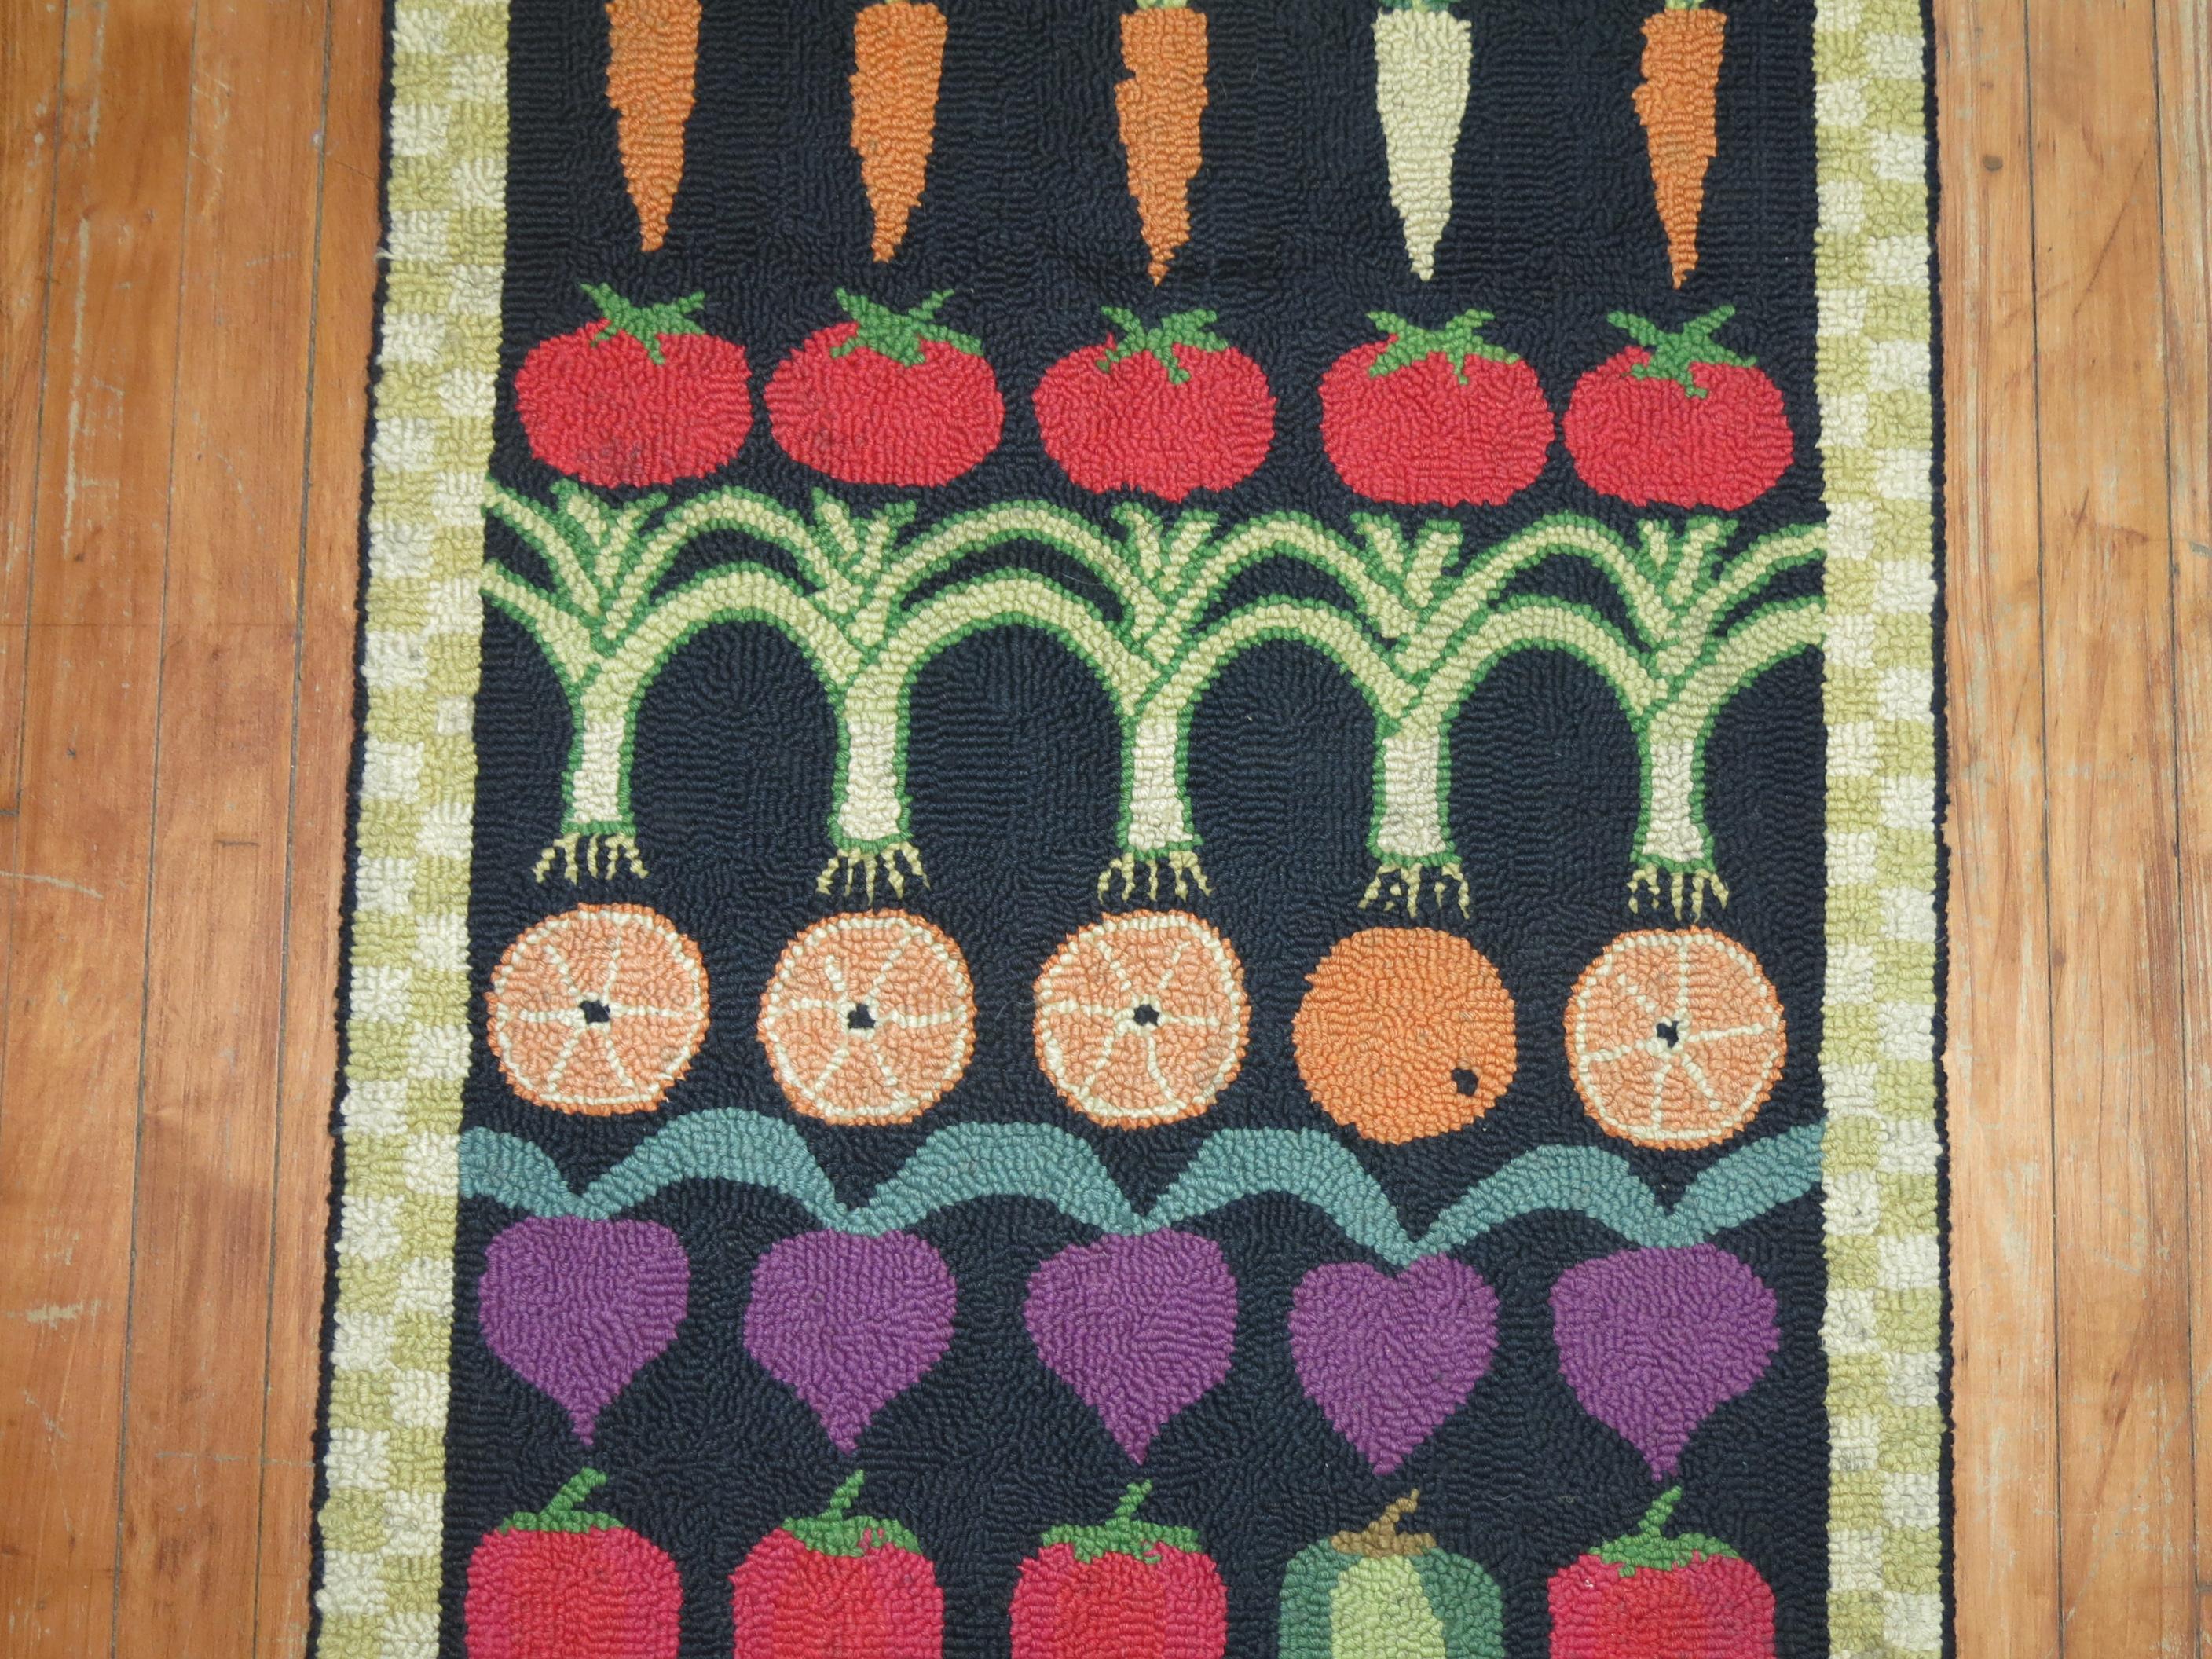 A handmade American Hooked rug from the early part of the 20th century showing rows of different fruits and vegetables. Condition is really nice no stains, no tears, has been professionally cleaned. Backed with blue fabric.